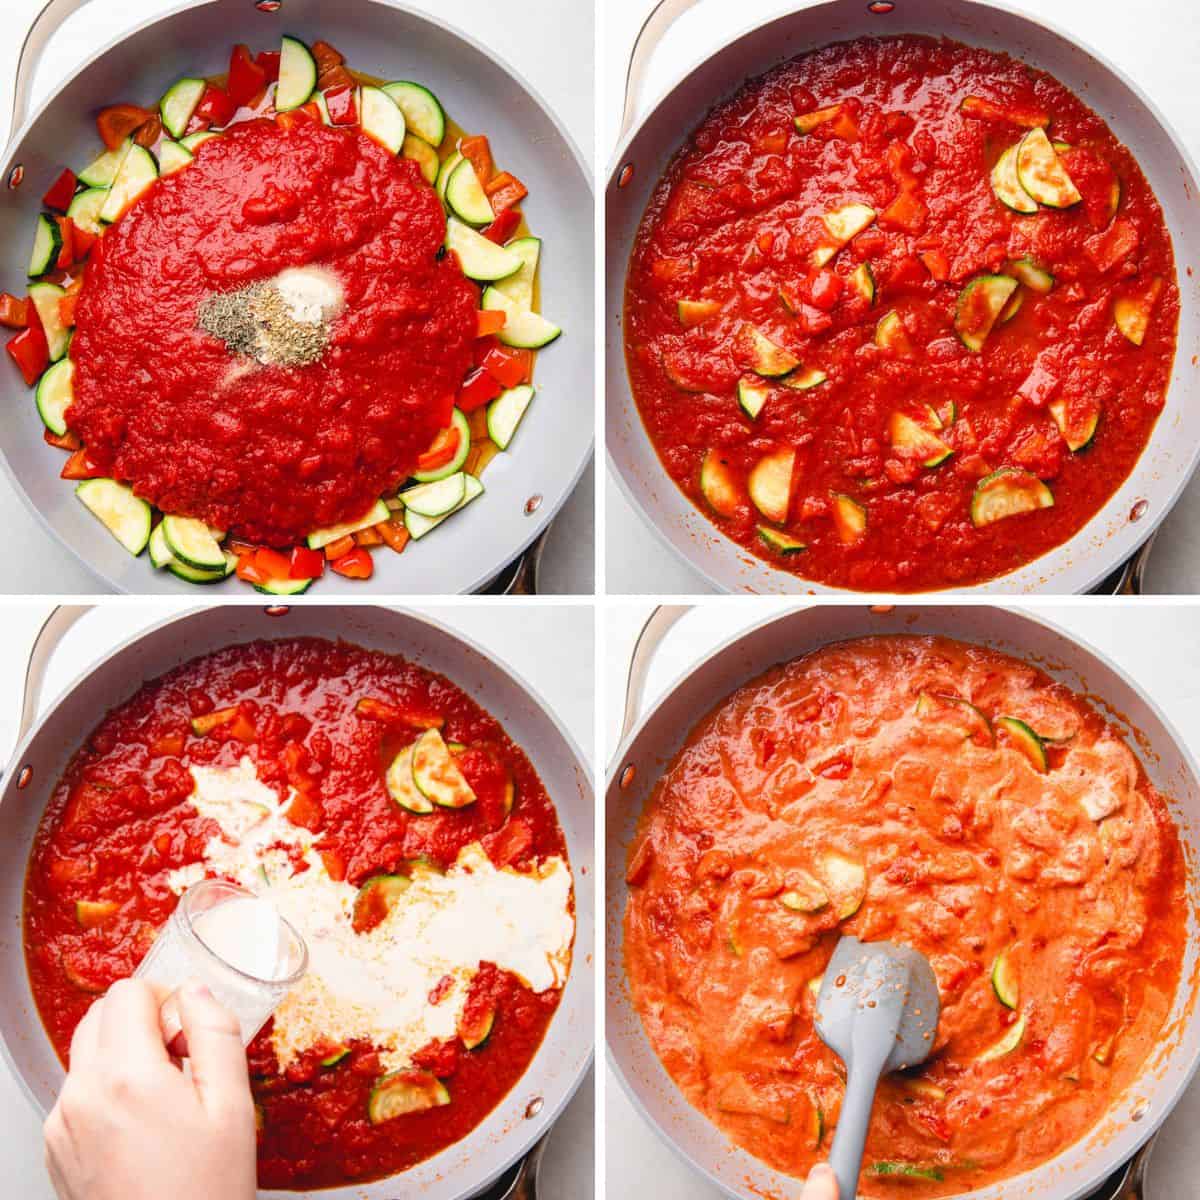 Process photos of adding tomato sauce, seasoning, and heavy cream to the cooked vegetables.